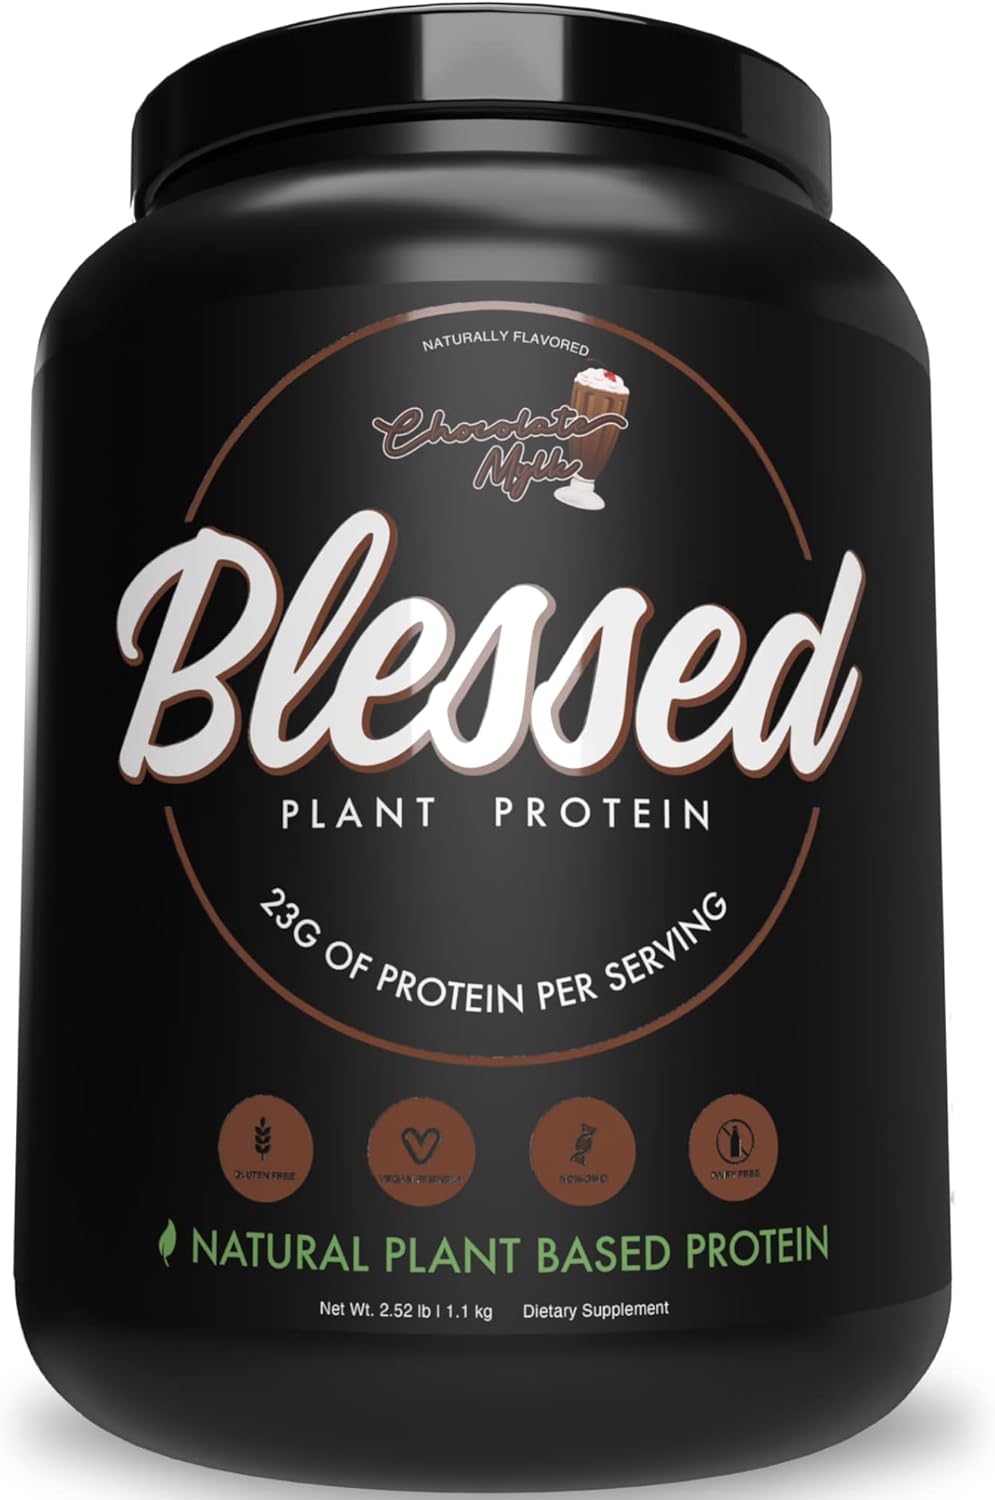 BLESSED Vegan Protein Powder - Plant Based Protein Powder Meal Replace